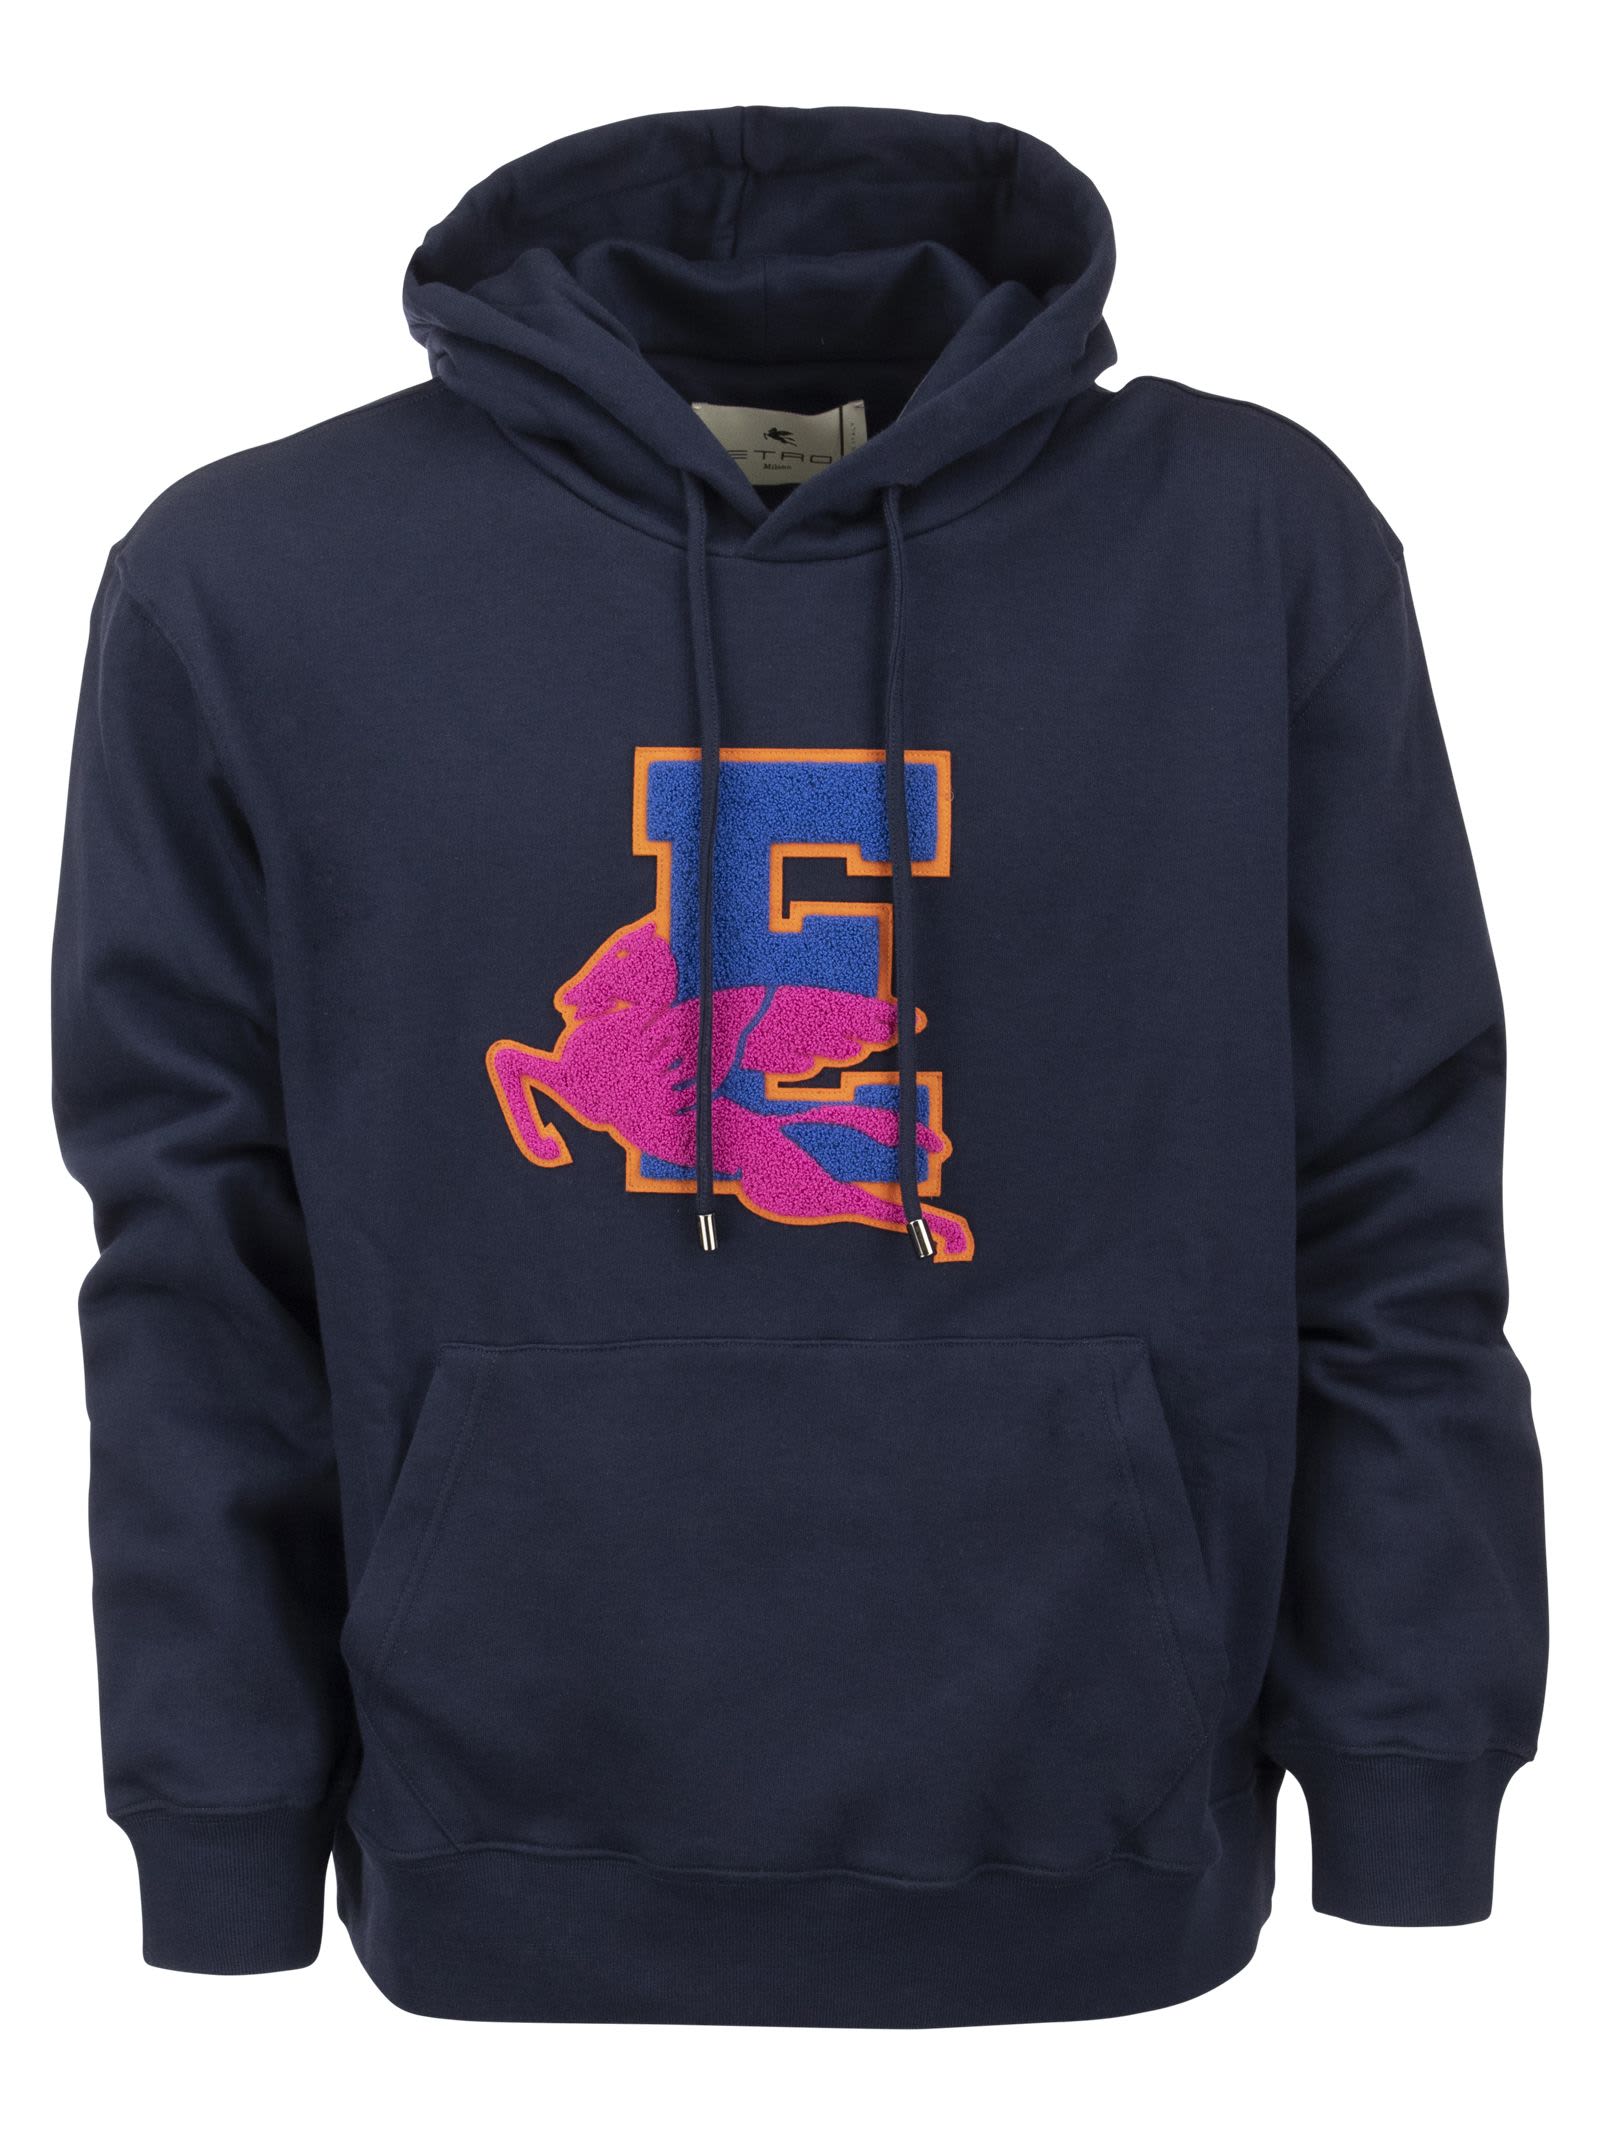 Jersey Sweatshirt With Embroidery